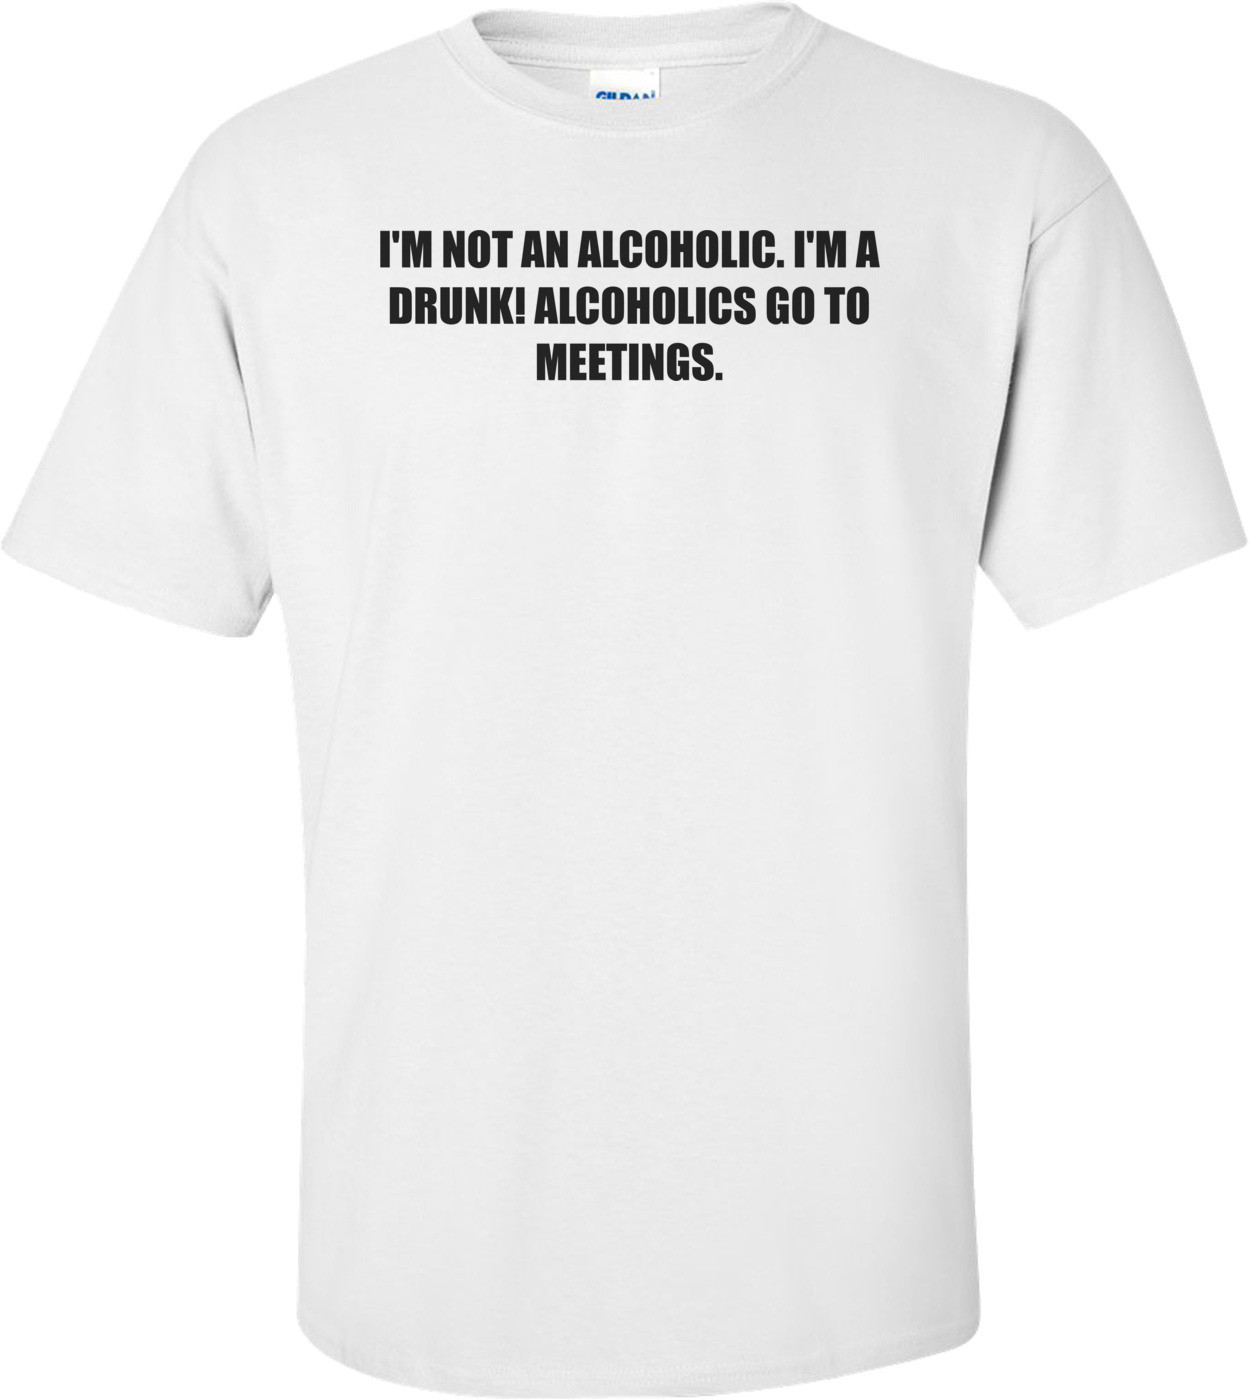 I'M NOT AN ALCOHOLIC. I'M A DRUNK! ALCOHOLICS GO TO MEETINGS.